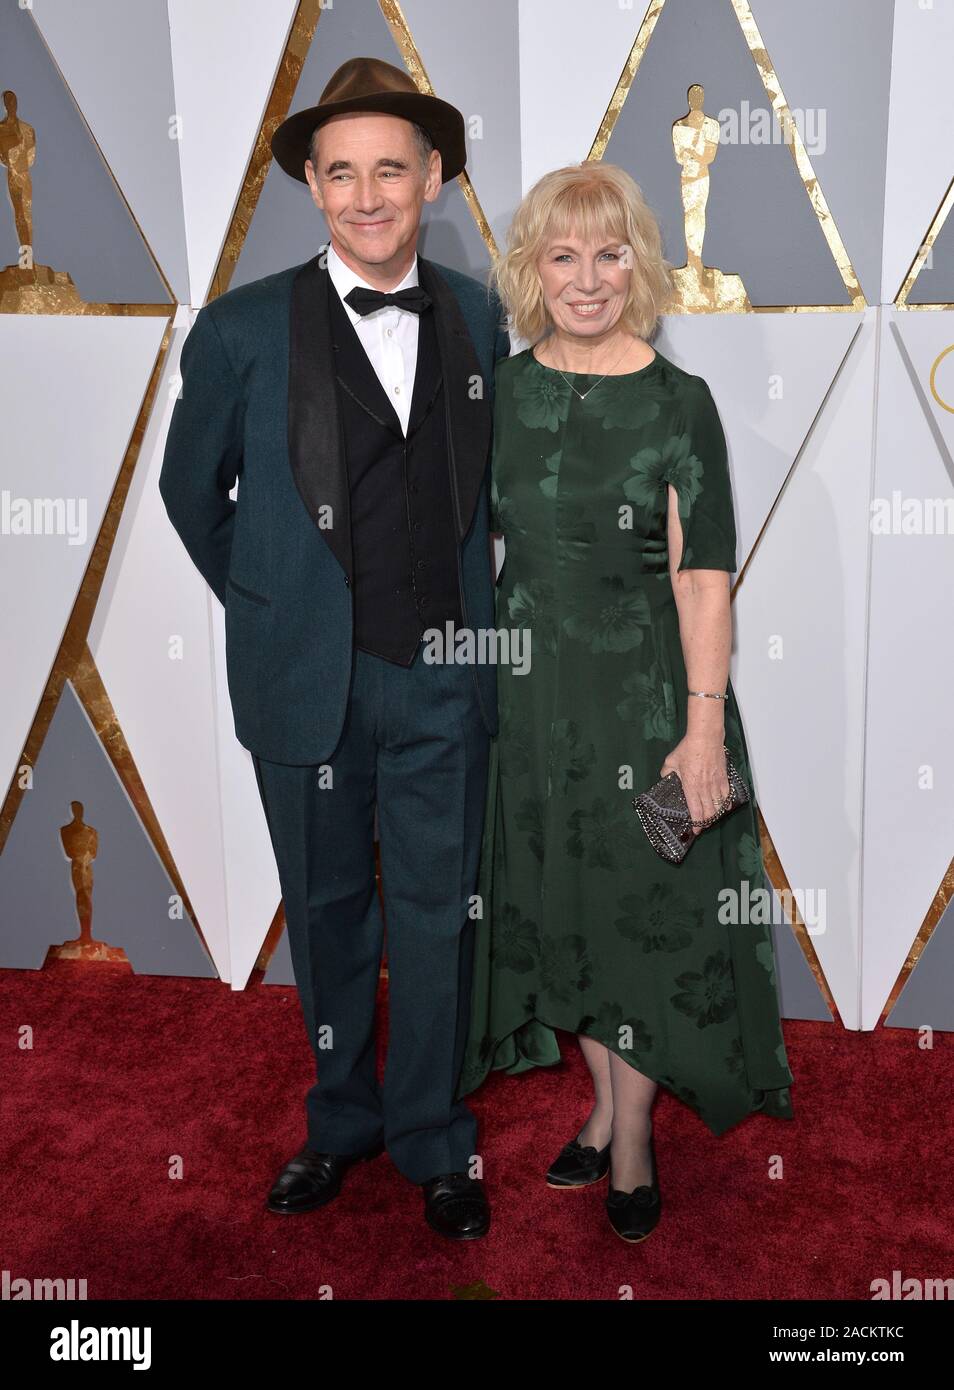 LOS ANGELES, CA - FEBRUARY 28, 2016: Mark Rylance & Claire van Kampen at the 88th Academy Awards at the Dolby Theatre, Hollywood. © 2016 Paul Smith / Featureflash Stock Photo